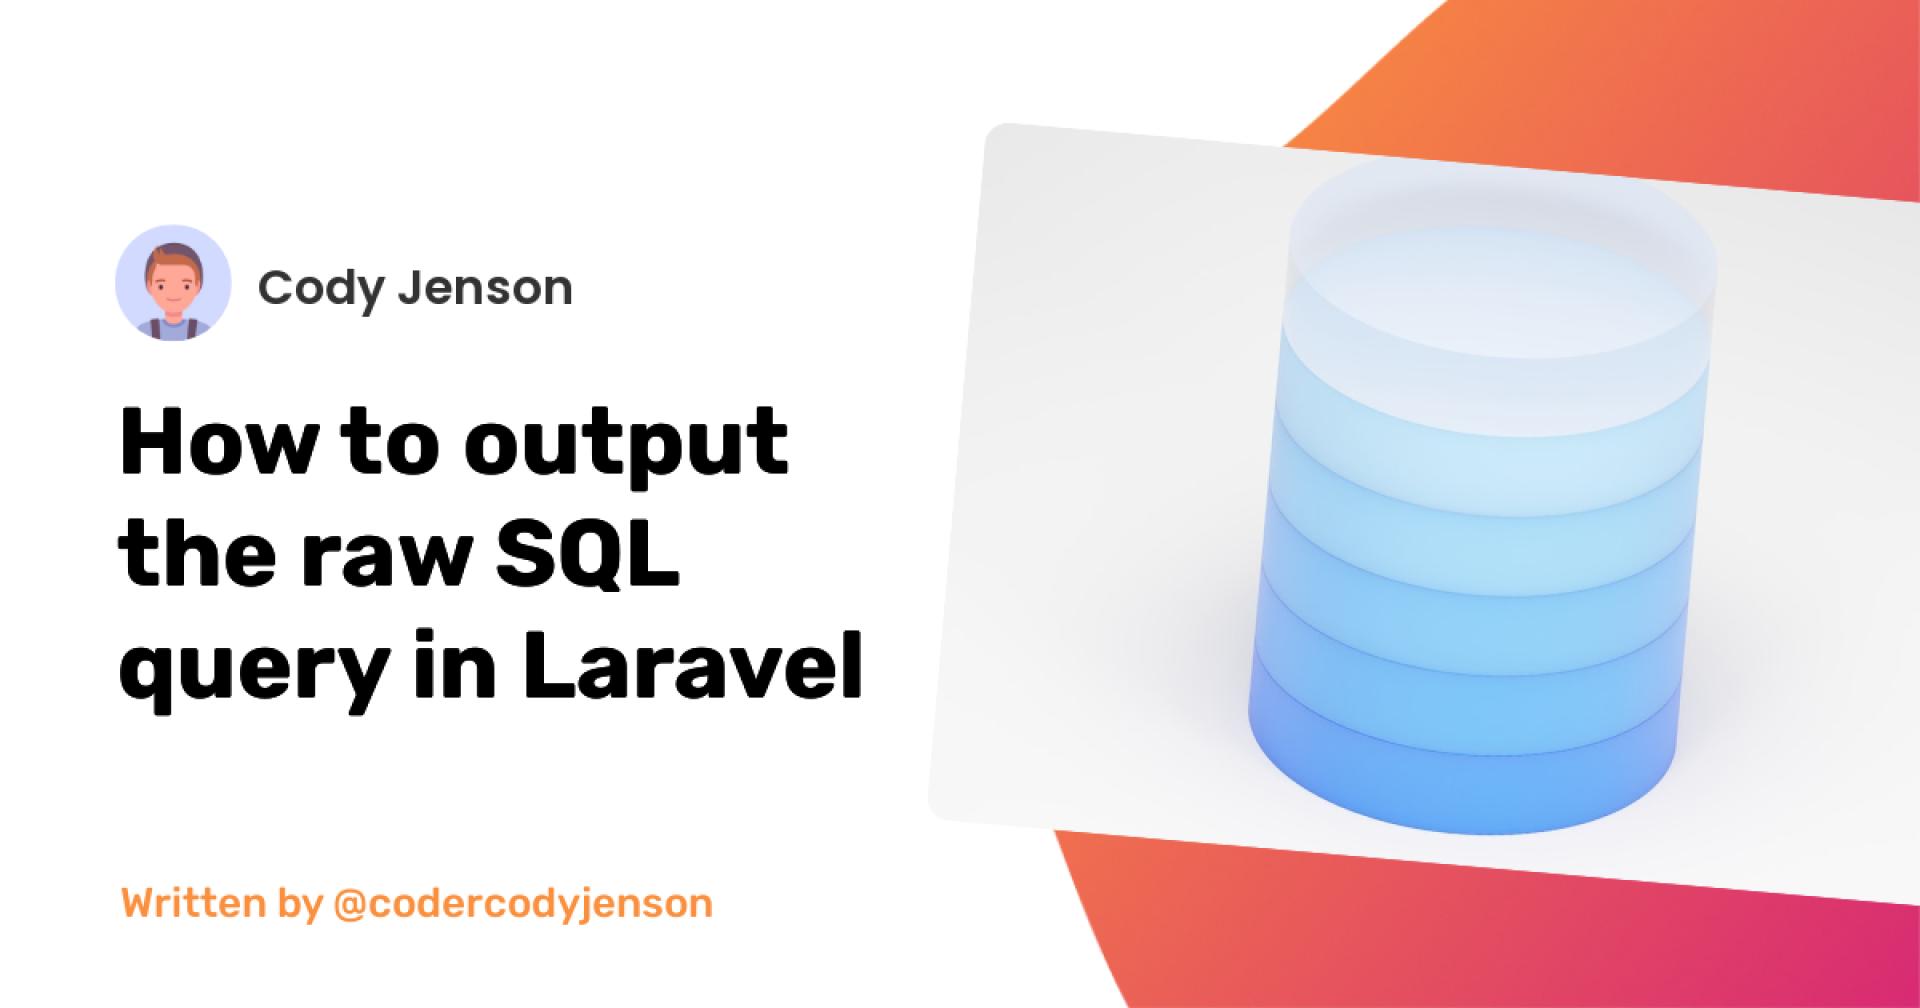 How to output the raw SQL query in Laravel